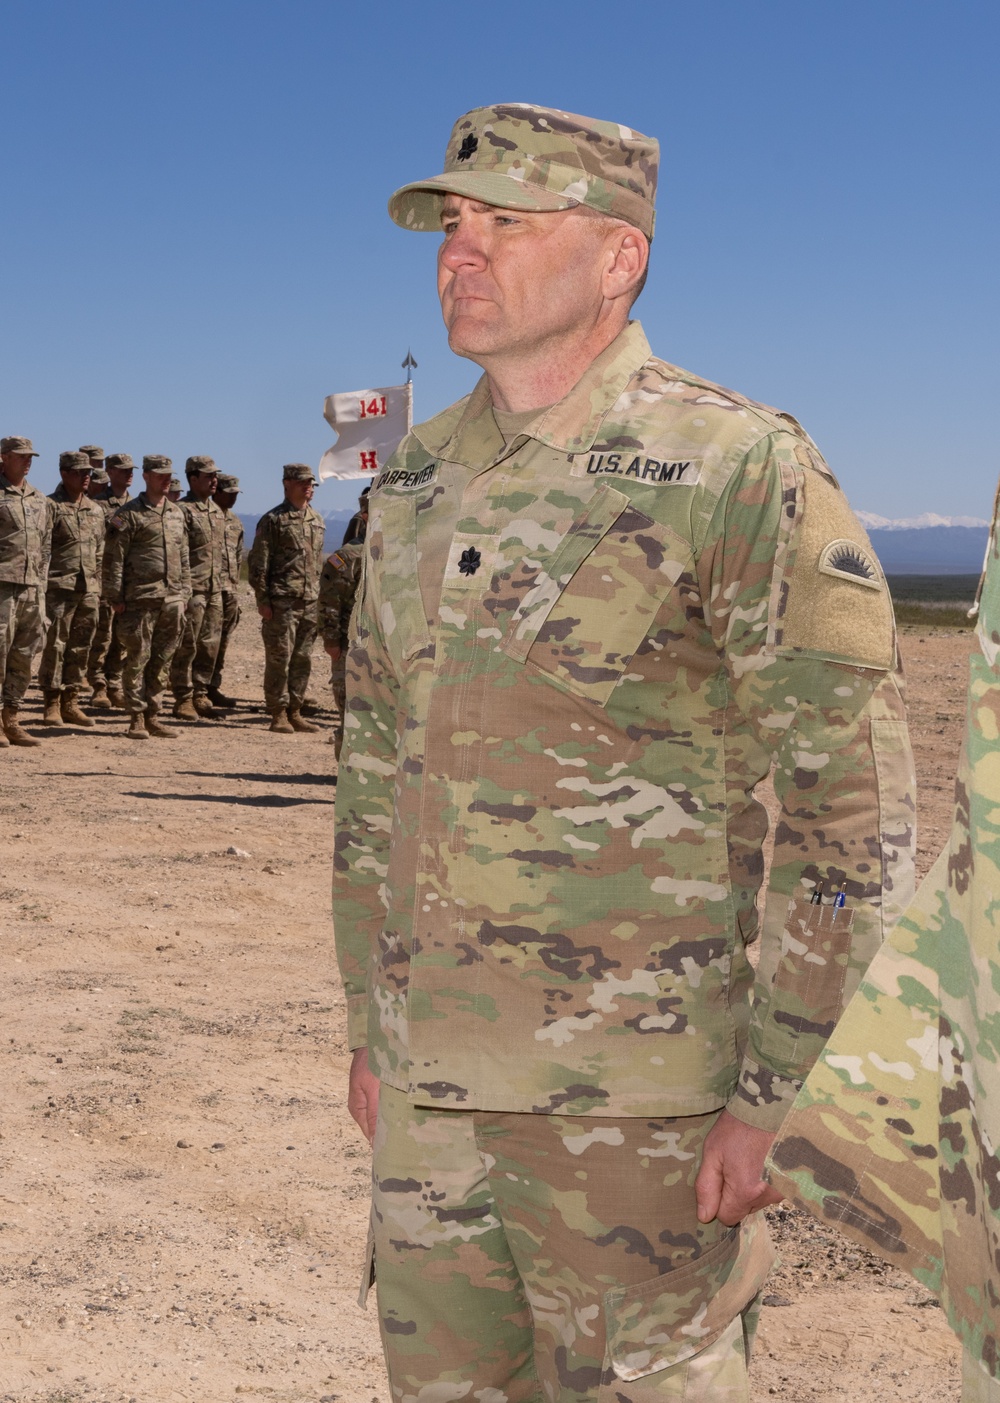 Command of Southern Oregon's 'Guardian' Battalion Passes to New Leader